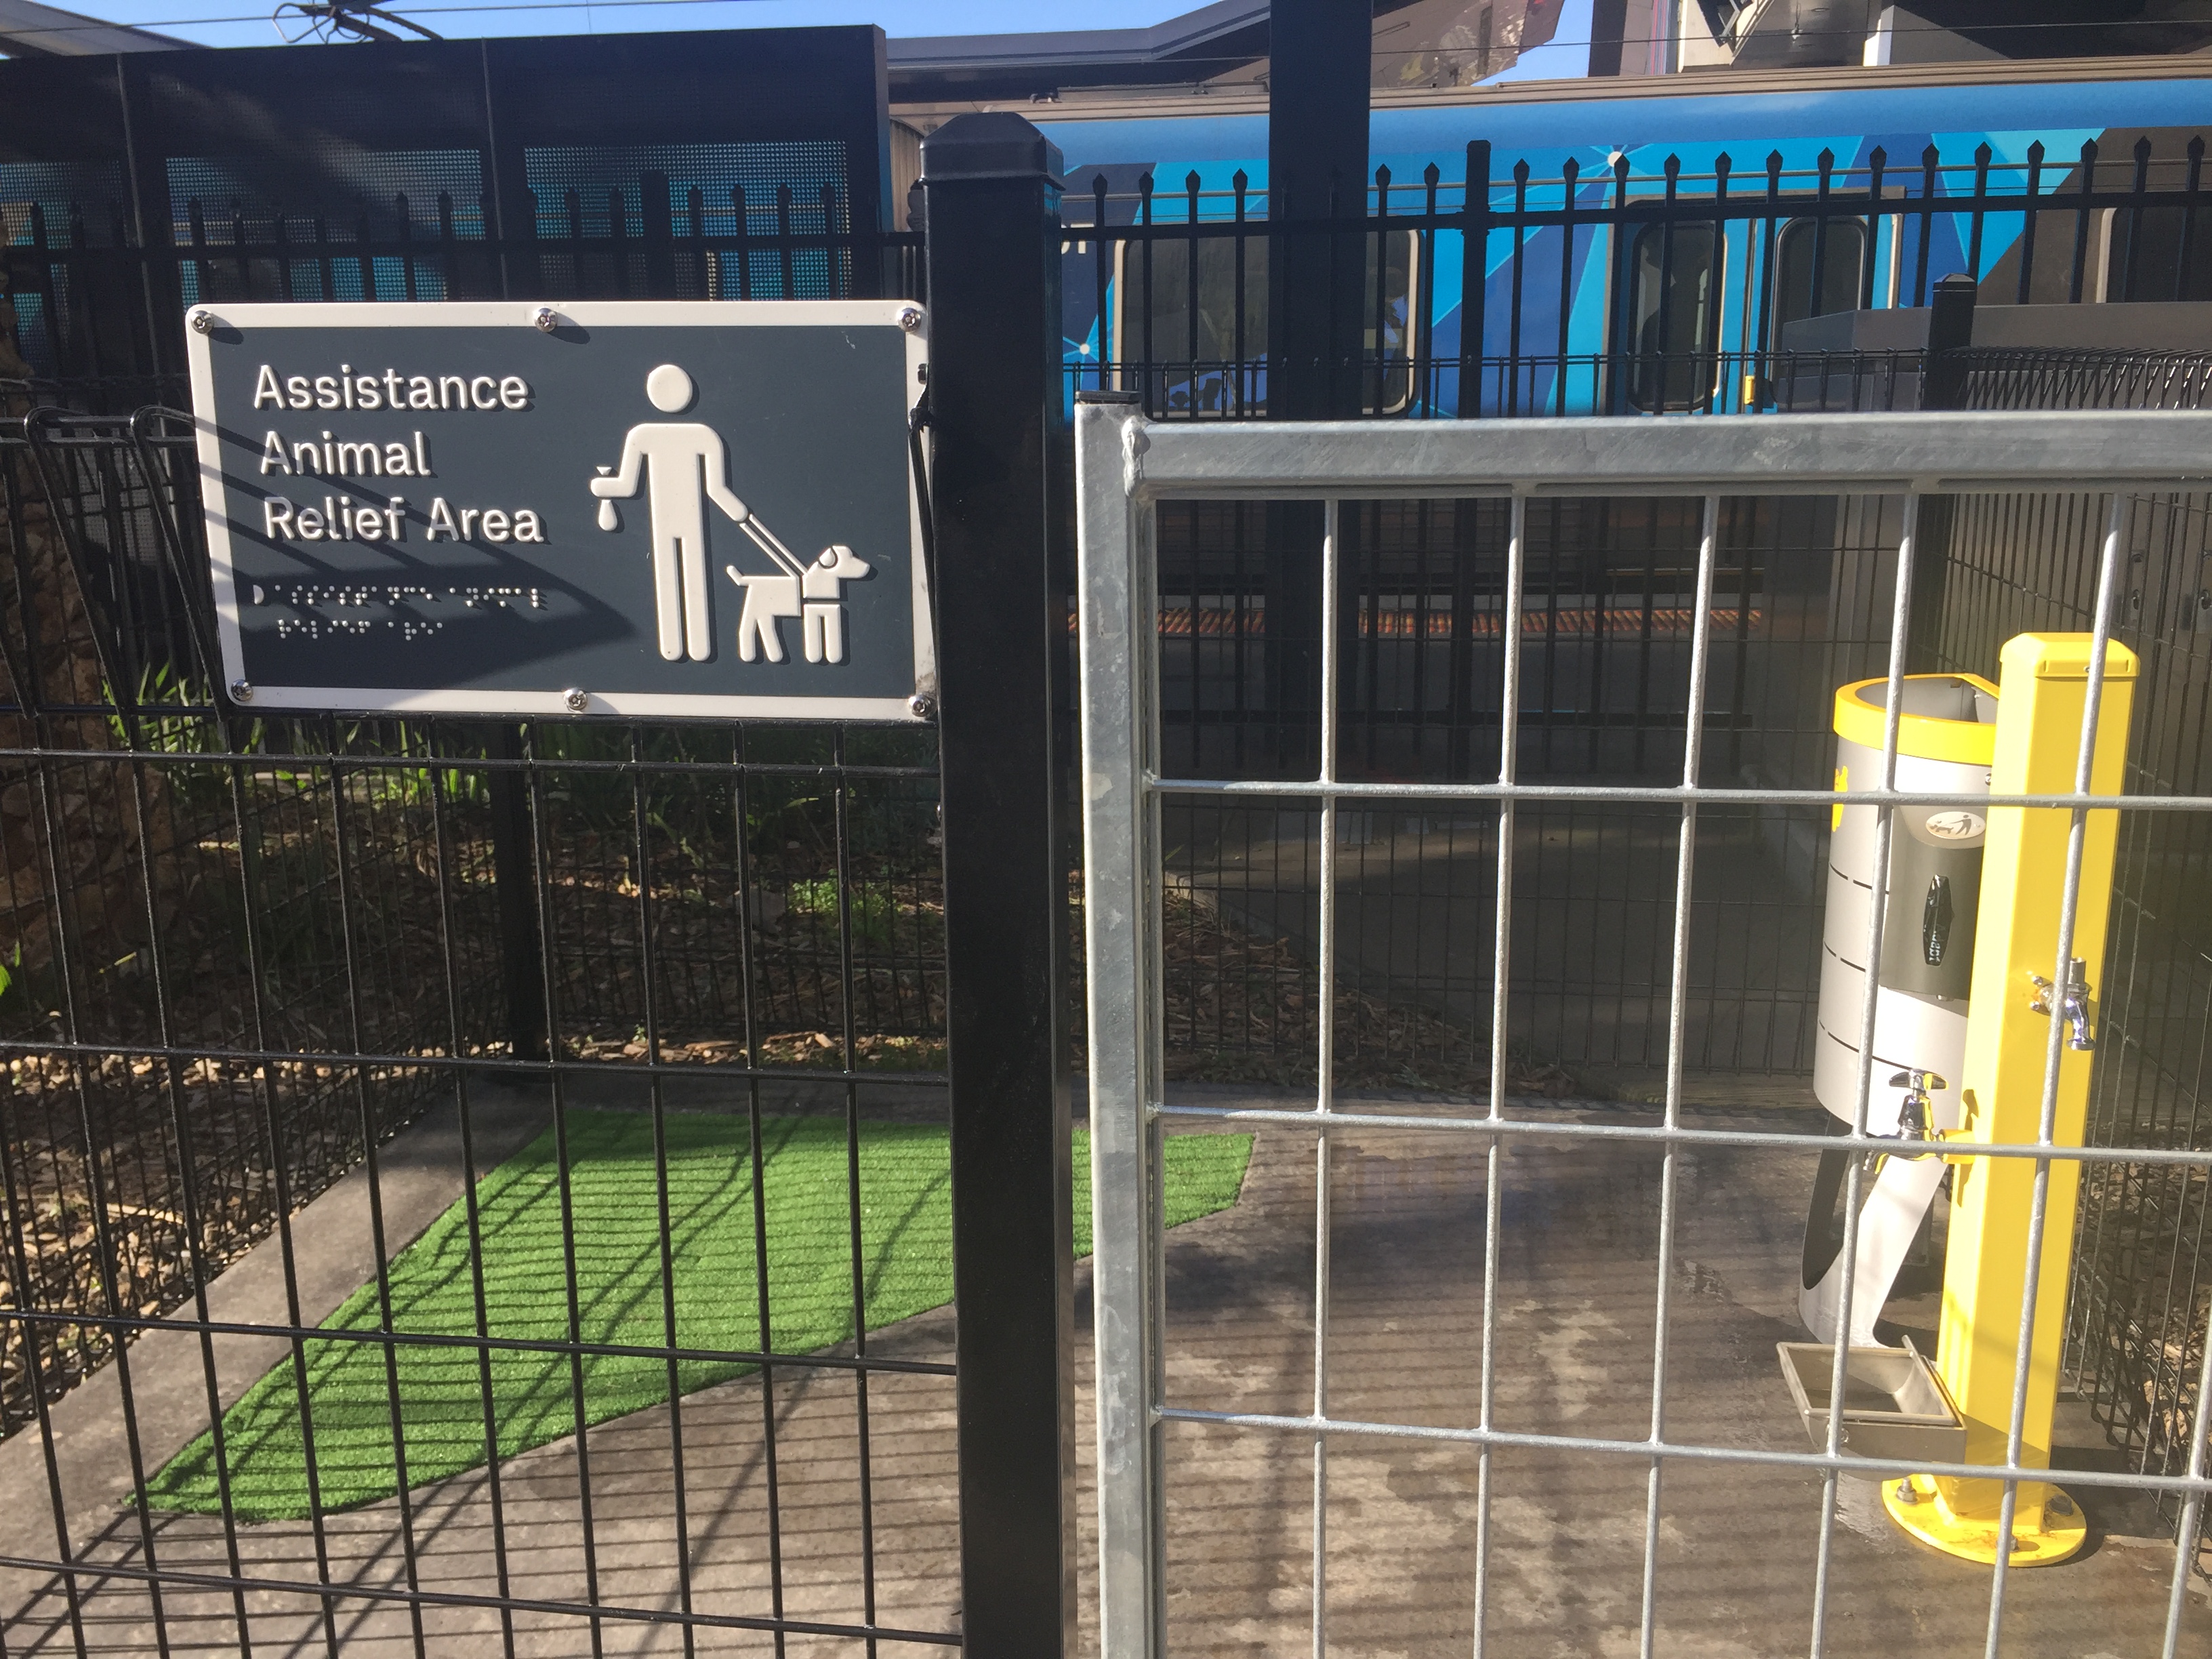 Photo of an Assistance Animal Relief Area